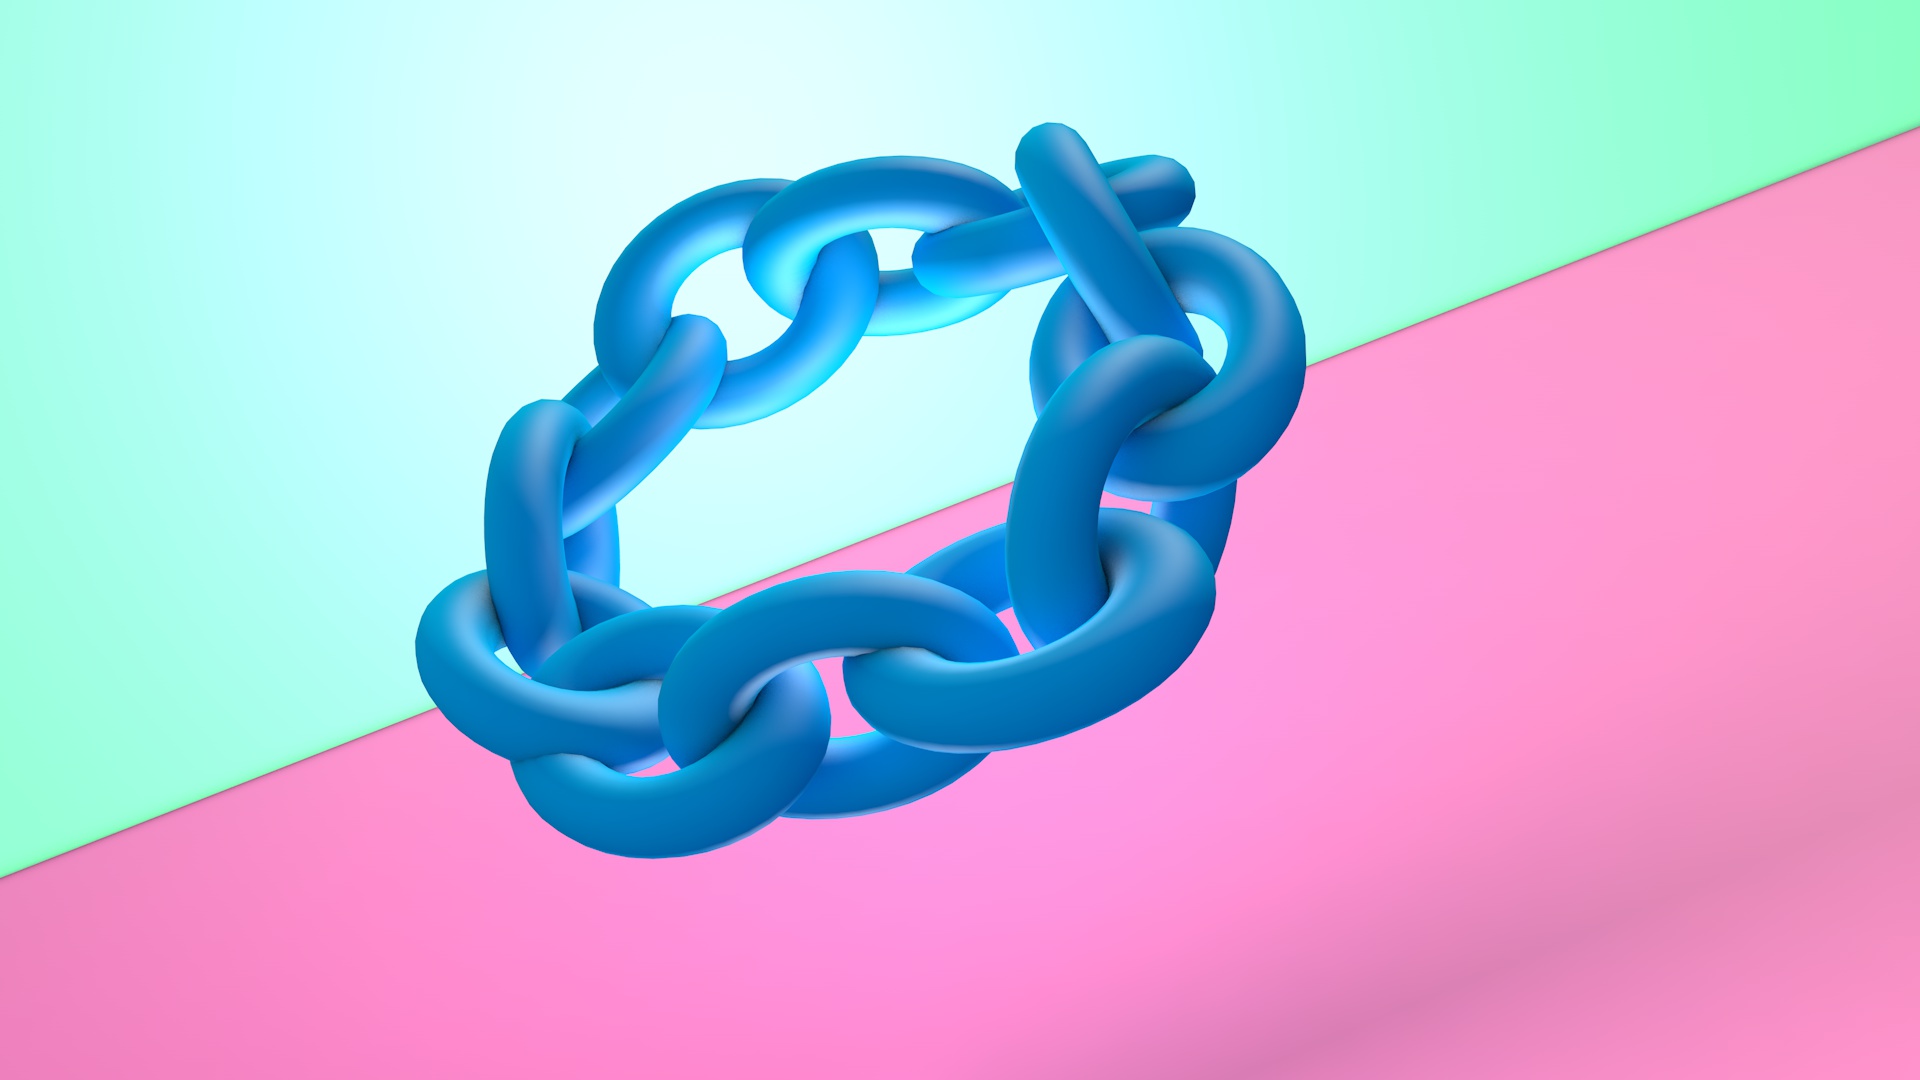 A chain circle made of thick blue links on a green and pink background.